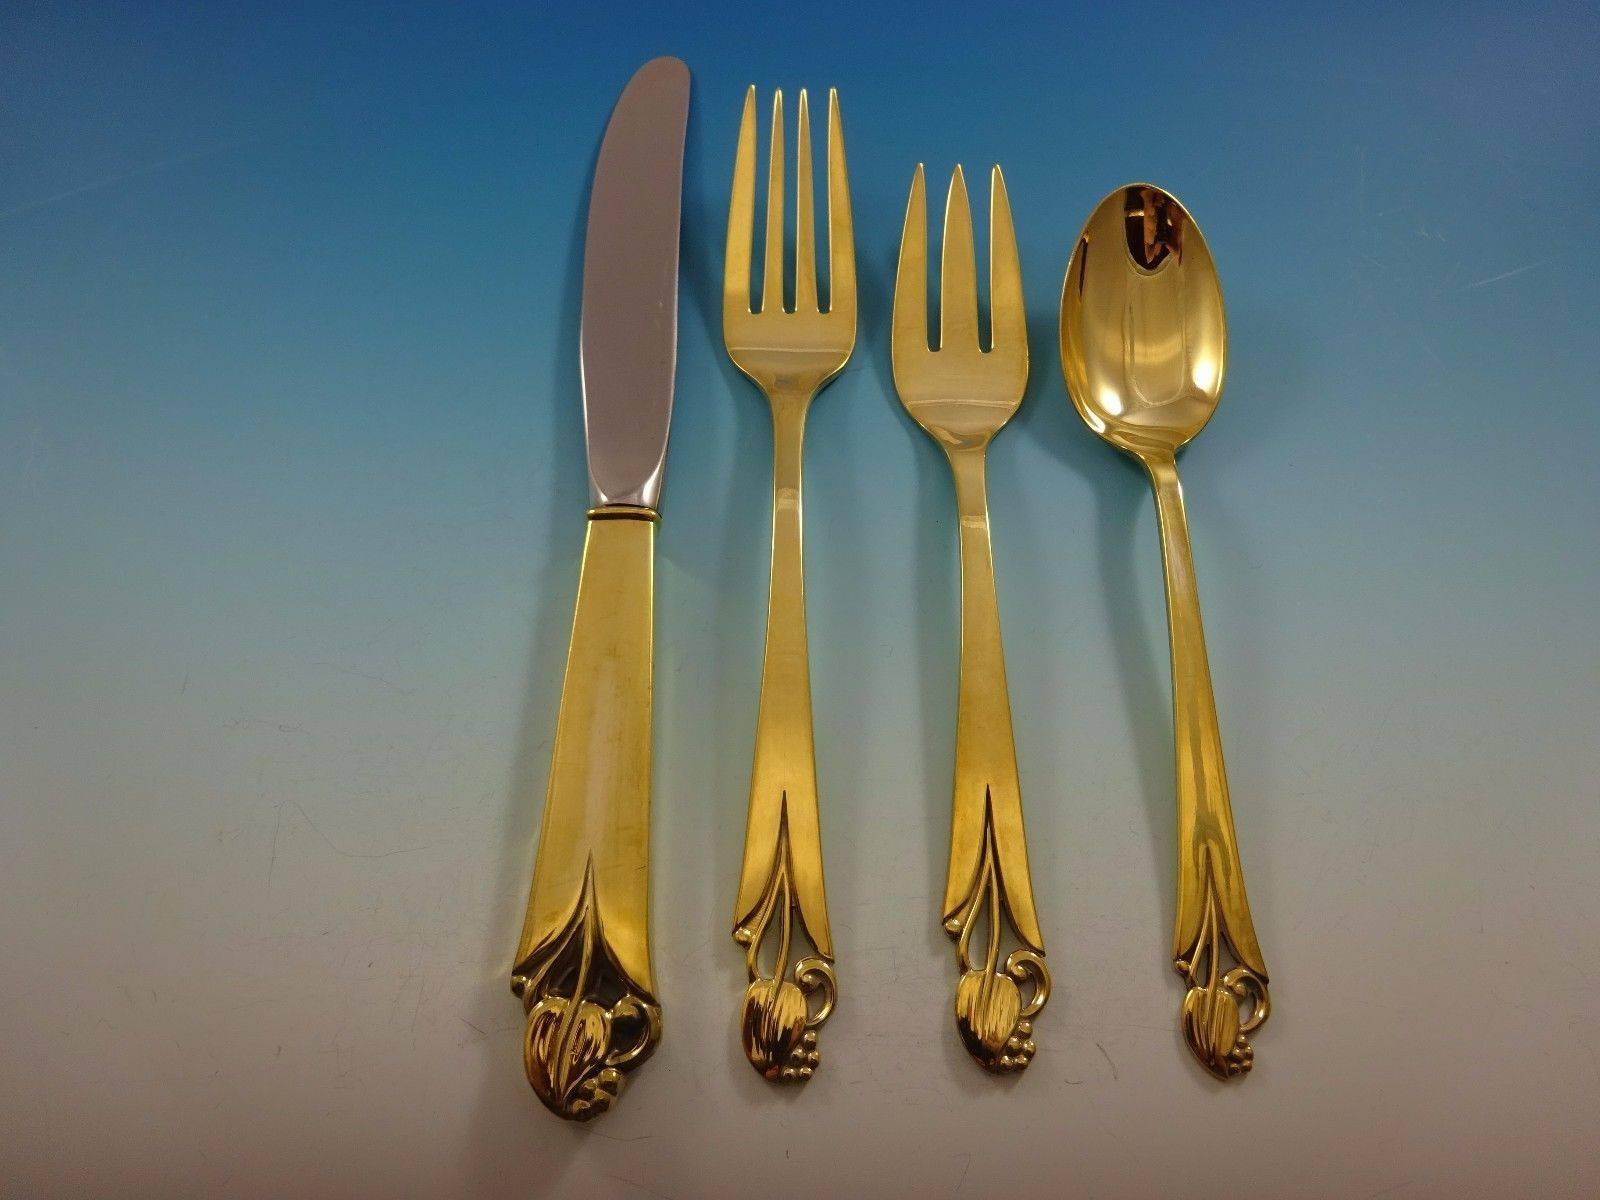 Woodlily Gold by Frank Smith Sterling silver flatware set of 24 pieces. This set is vermeil (completely gold-washed) and includes: 

Six knives, 8 3/4